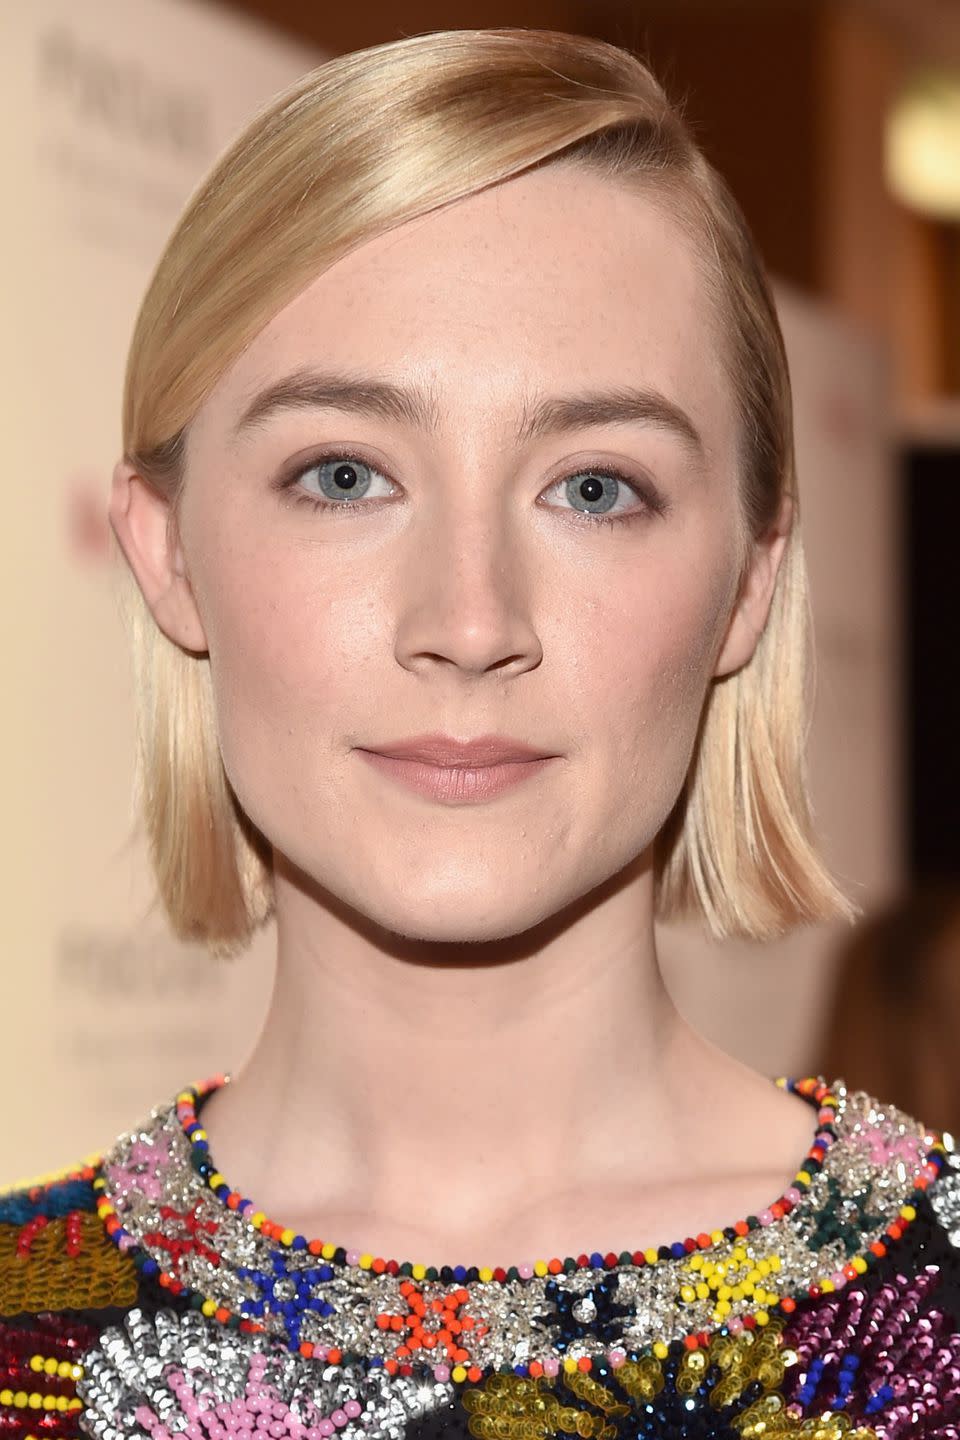 <p>For skin as clear and radiant as Saoirse Ronan's, you need to start with your skincare, specifically a <a rel="nofollow noopener" href="https://www.harpersbazaar.com/beauty/skin-care/a20541/radiant-skin/" target="_blank" data-ylk="slk:vitamin C serum" class="link ">vitamin C serum</a>, such as Skinceuticals' <a rel="nofollow noopener" href="https://www.cowshed.com/uk/skinceuticals-c-e-ferulic-30ml.html?gclid=Cj0KCQjw8YXXBRDXARIsAMzsQuX9J-ZWn19qKhbFFEcOwqUYeG-PZp3_G365W11xhRcD3uPZOeVmxosaAmqqEALw_wcB" target="_blank" data-ylk="slk:C E Ferulic" class="link ">C E Ferulic</a>, £129, to add brightness and fight fine lines. Then, for radiance without shininess, use an illuminating primer, like Hourglass' <a rel="nofollow noopener" href="https://www.googleadservices.com/pagead/aclk?sa=L&ai=DChcSEwjnyoet2tfaAhXVtsAKHWzsBfQYABADGgJpbQ&ohost=www.google.co.uk&cid=CAESEeD2mO05dNWLDI9ud_ATTFpn&sig=AOD64_0F3bSn_nOuj_K5VflpUoimC4GUHA&ctype=5&q=&ved=0ahUKEwiH24Ct2tfaAhWhm-AKHdtKBQEQ9aACCEA&adurl=" target="_blank" data-ylk="slk:Ambient Light Correcting Primer" class="link ">Ambient Light Correcting Primer</a>, £36, before your foundation, and a light-reflecting powder, like Guerlain's <a rel="nofollow noopener" href="https://www.feelunique.com/p/GUERLAIN-Meteorites-Blossom-Collection-Meteorites-Pearls-25g?option=16781&gclid=Cj0KCQjw8YXXBRDXARIsAMzsQuX3jugUBGTM-Dc-8dxy1BbYEfM8iSe-w5YFzU79Uvh7O5uG1q8K_9QaAoYEEALw_wcB&gclsrc=aw.ds" target="_blank" data-ylk="slk:Météorites Pearls" class="link ">Météorites Pearls</a>, £42, that contains a hint of blush, afterwards.</p>